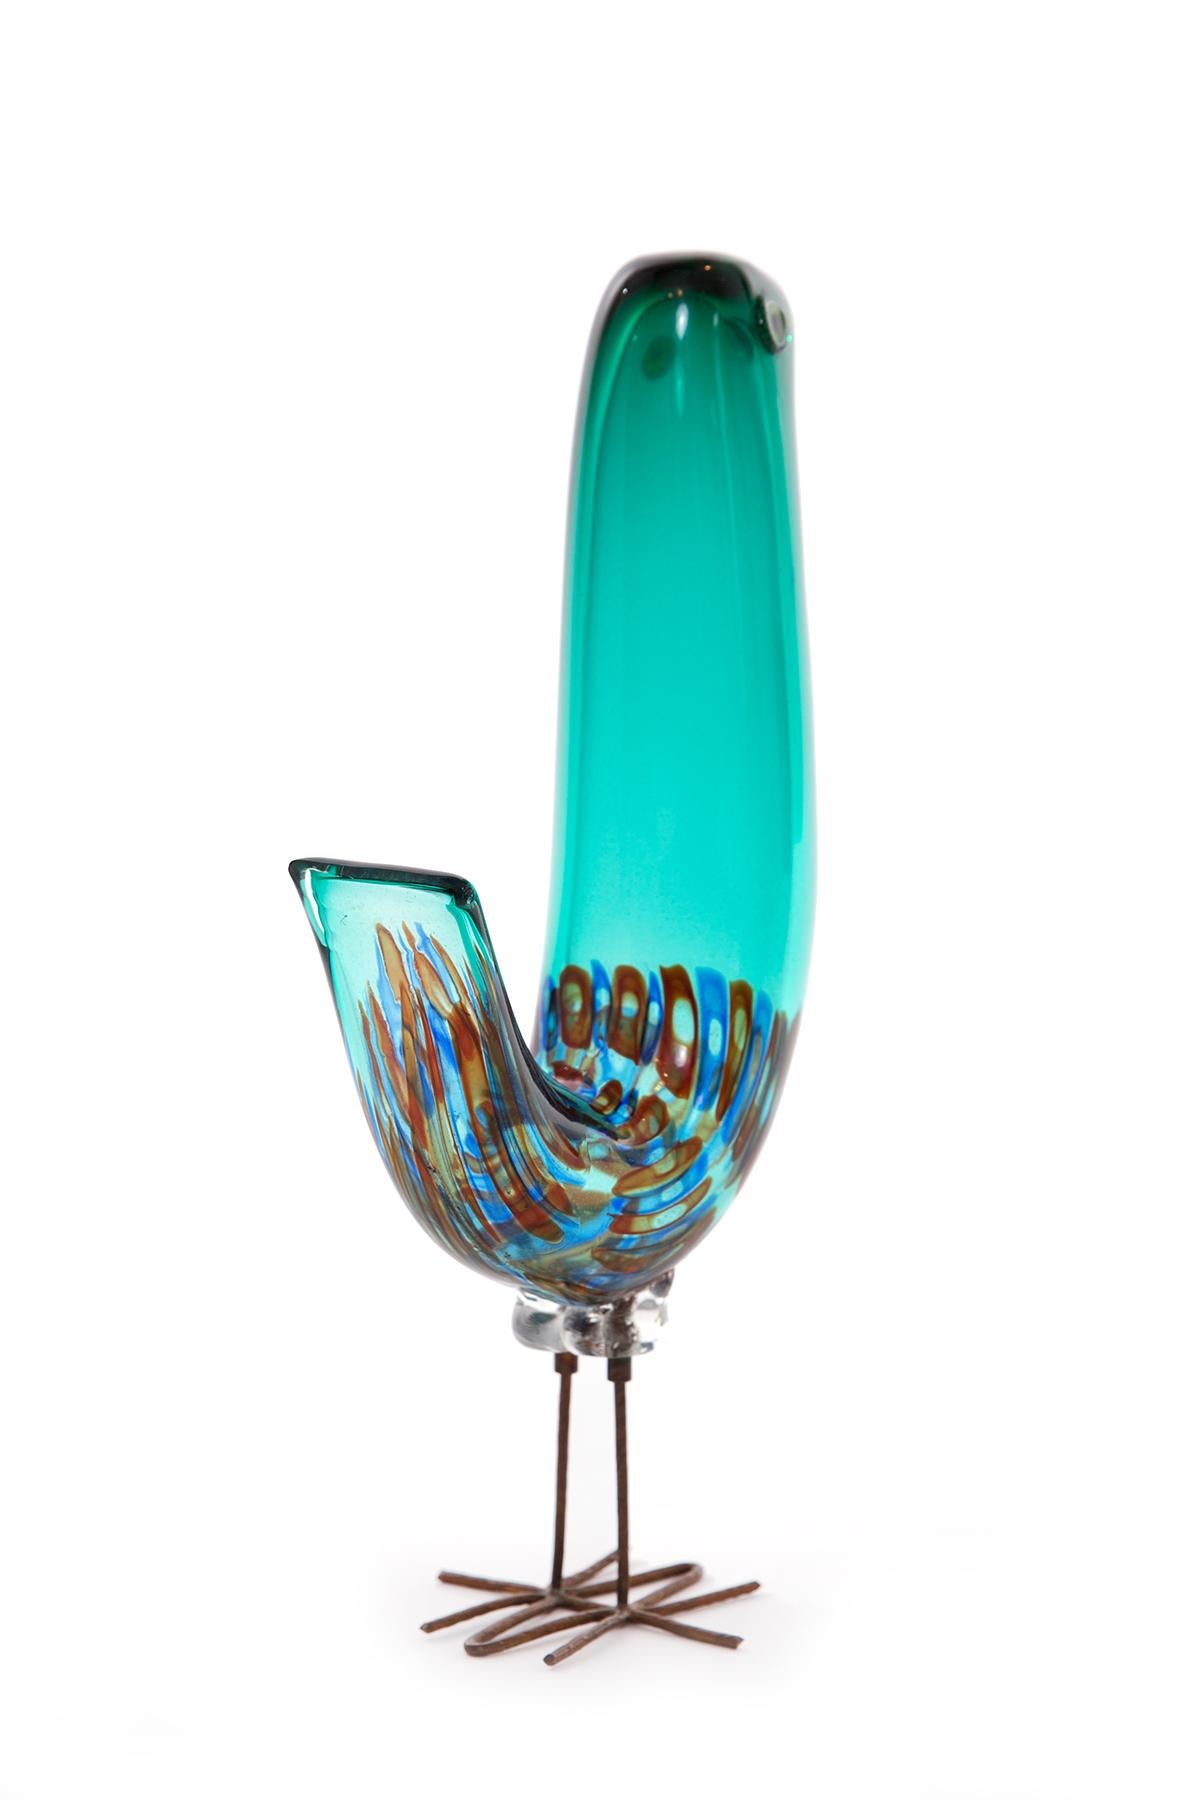 Alessandro Pianon ‘Pulcini’ murano glass sculpture from 1964. This rare example has patinated bronze legs and beautiful fluted form with incredible interior and exterior coloring.